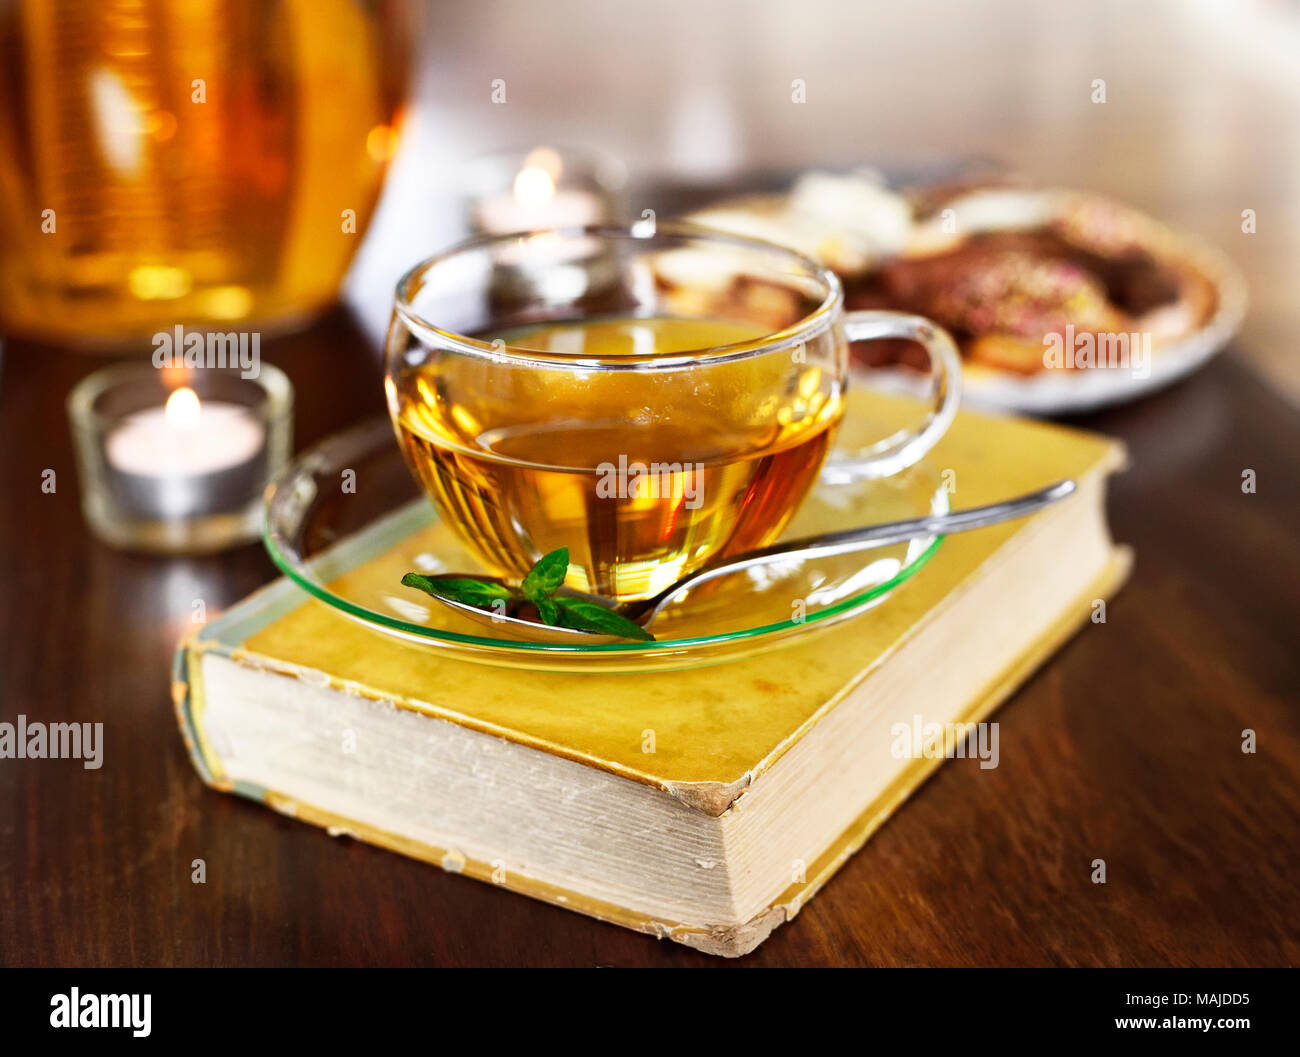 Teatime scene with glass tea pot and cup of tea, old book and hot steam. Idyllic tea time or relaxation scene with cookies and candles. Stock Photo